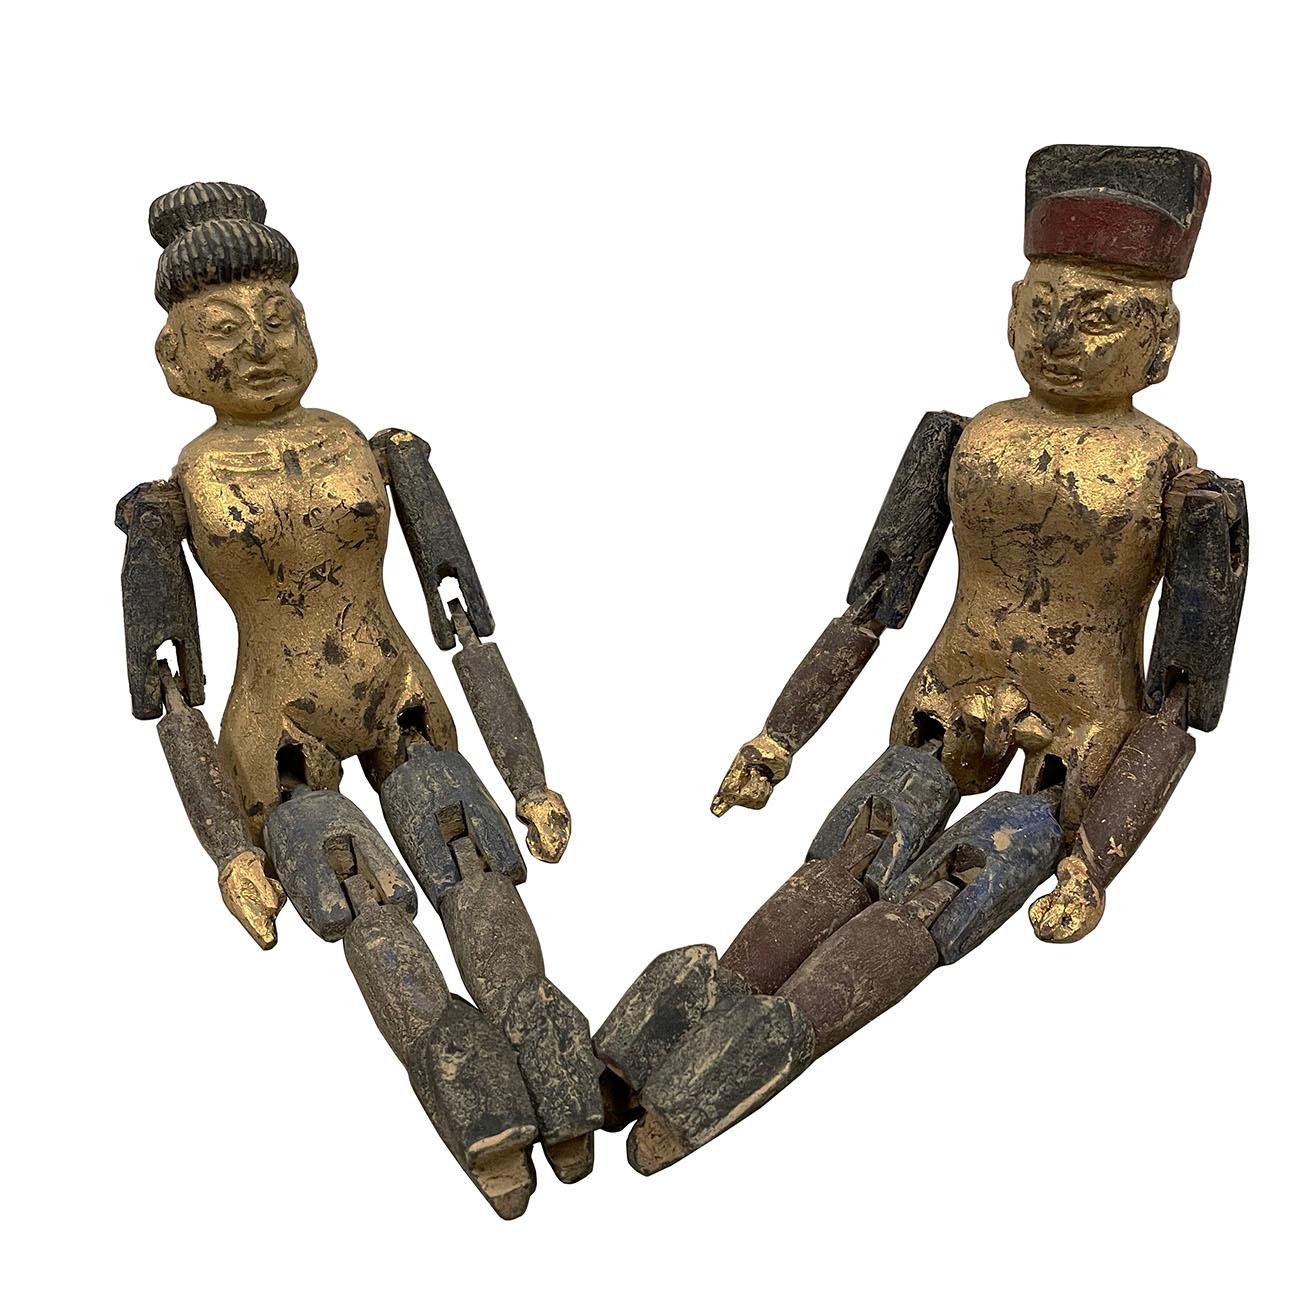 Rare find antique Chinese gilt wooden carved adult toys. It is 100 percent hand made hand carved from Camphor wood with gilt painting on it. They are the couple of a man and a women. The joint of the arms and legs of this pair of toys are movable.